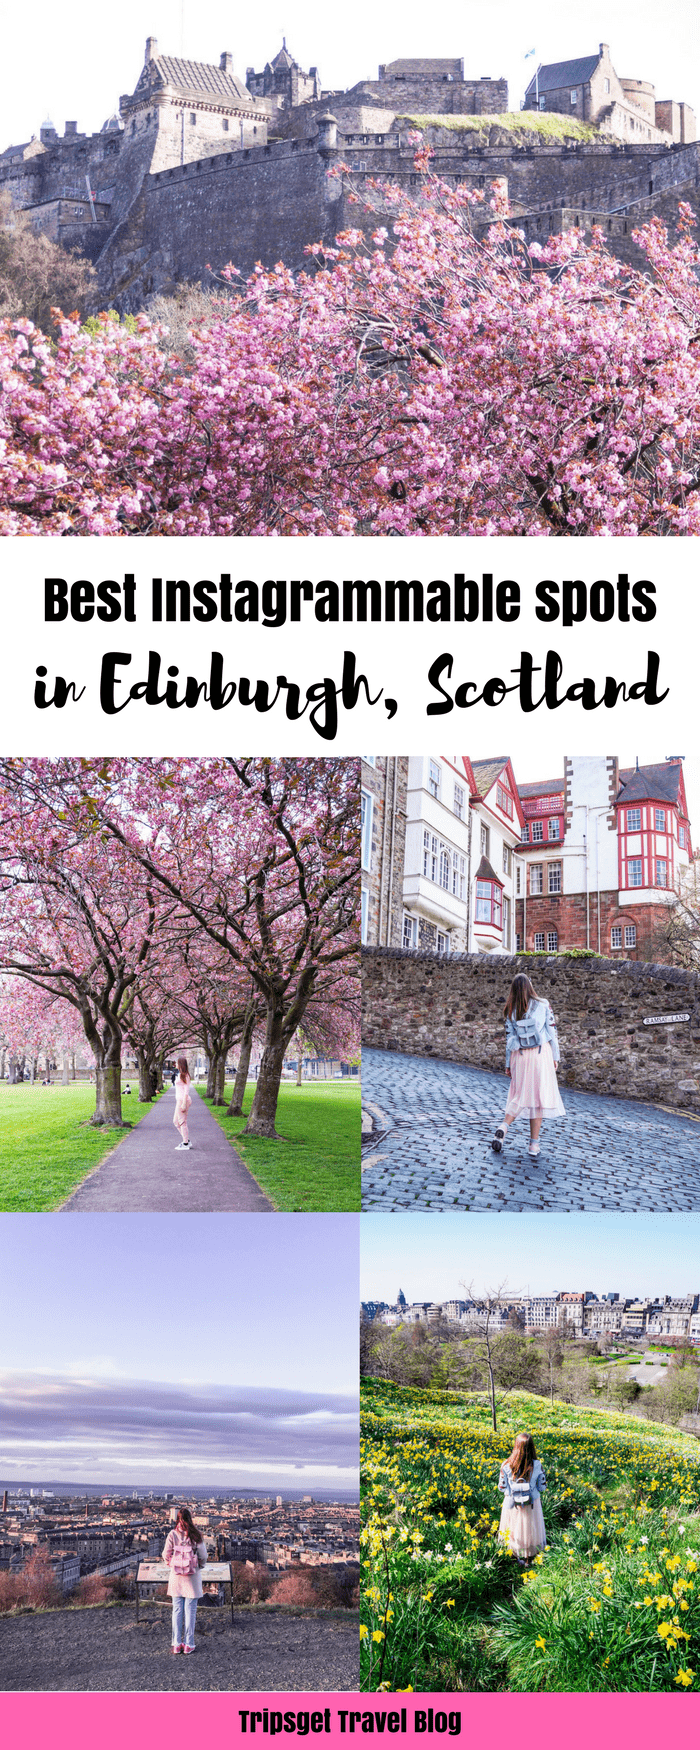 Looking for the best Instagrammable spots in Edinburgh, Scotland? You're in the right place, keep reading! Royal Mile, Calton Hill, Arthur's Seat, Edinburgh cute cafes, Edinburgh brunch spots, Instagrammable places in Scotland, UK, London, Cherry Blossom, Edinburgh University